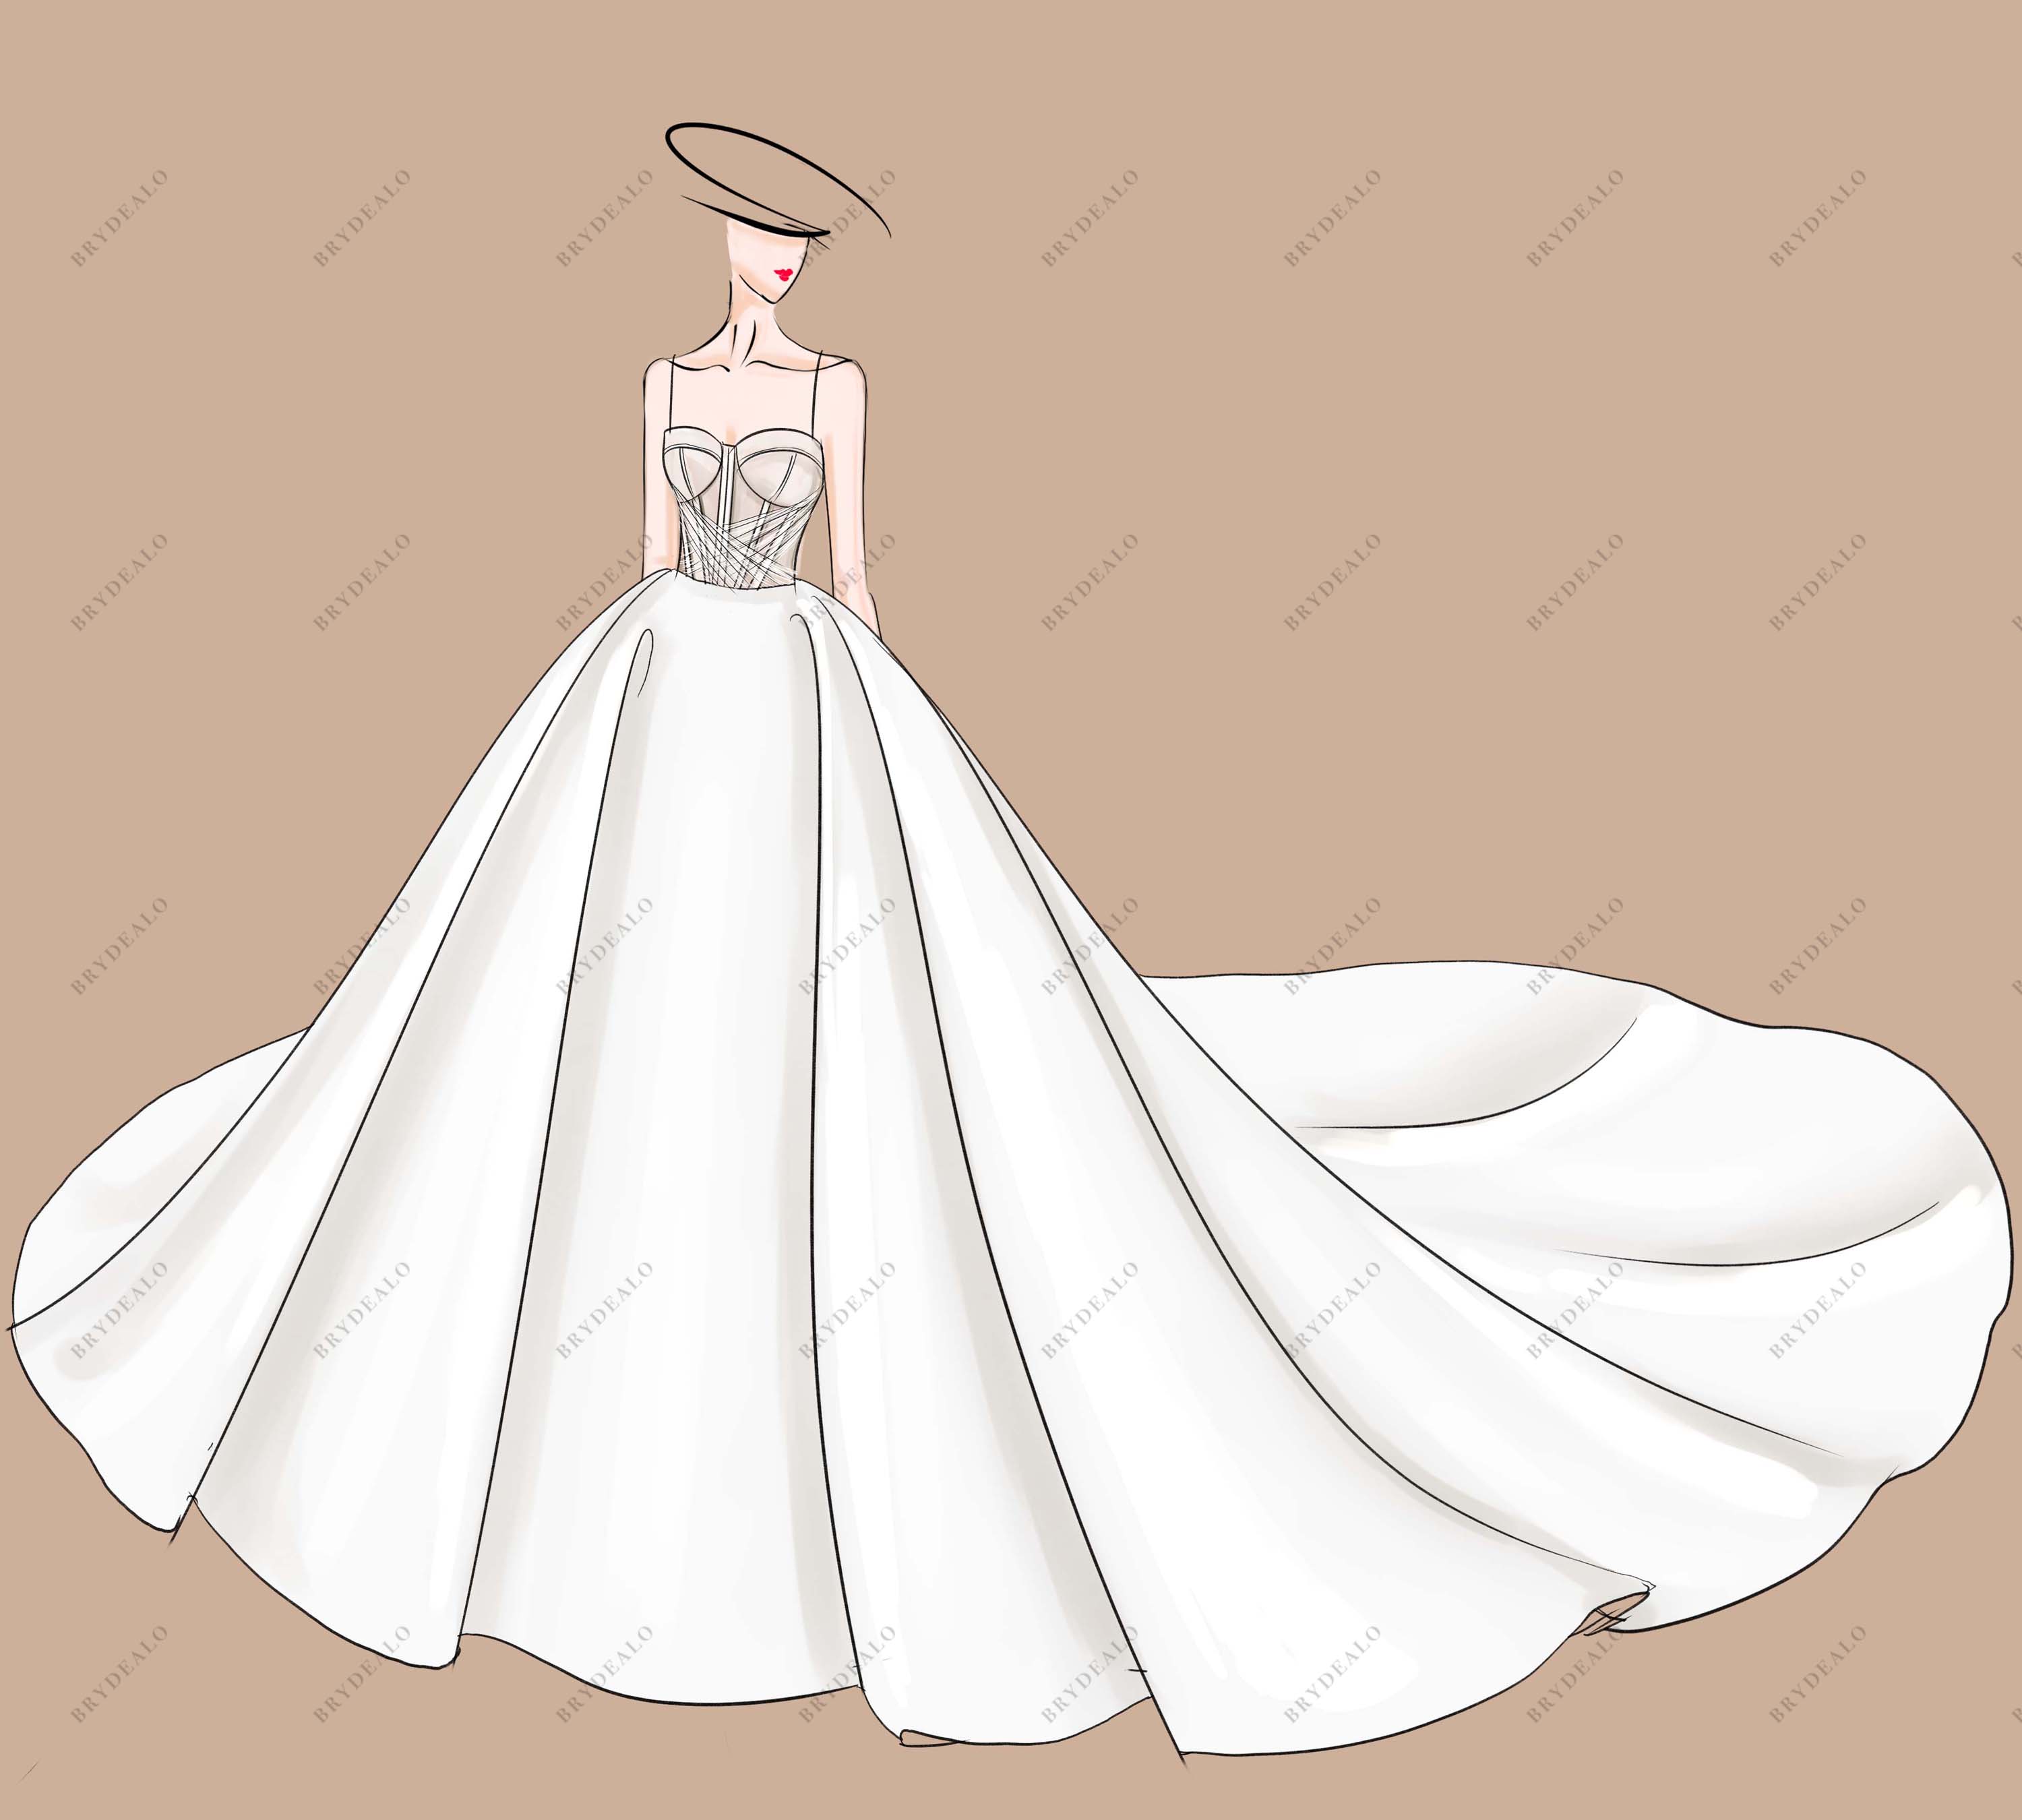 1631 Ball Gown Drawing Images Stock Photos  Vectors  Shutterstock